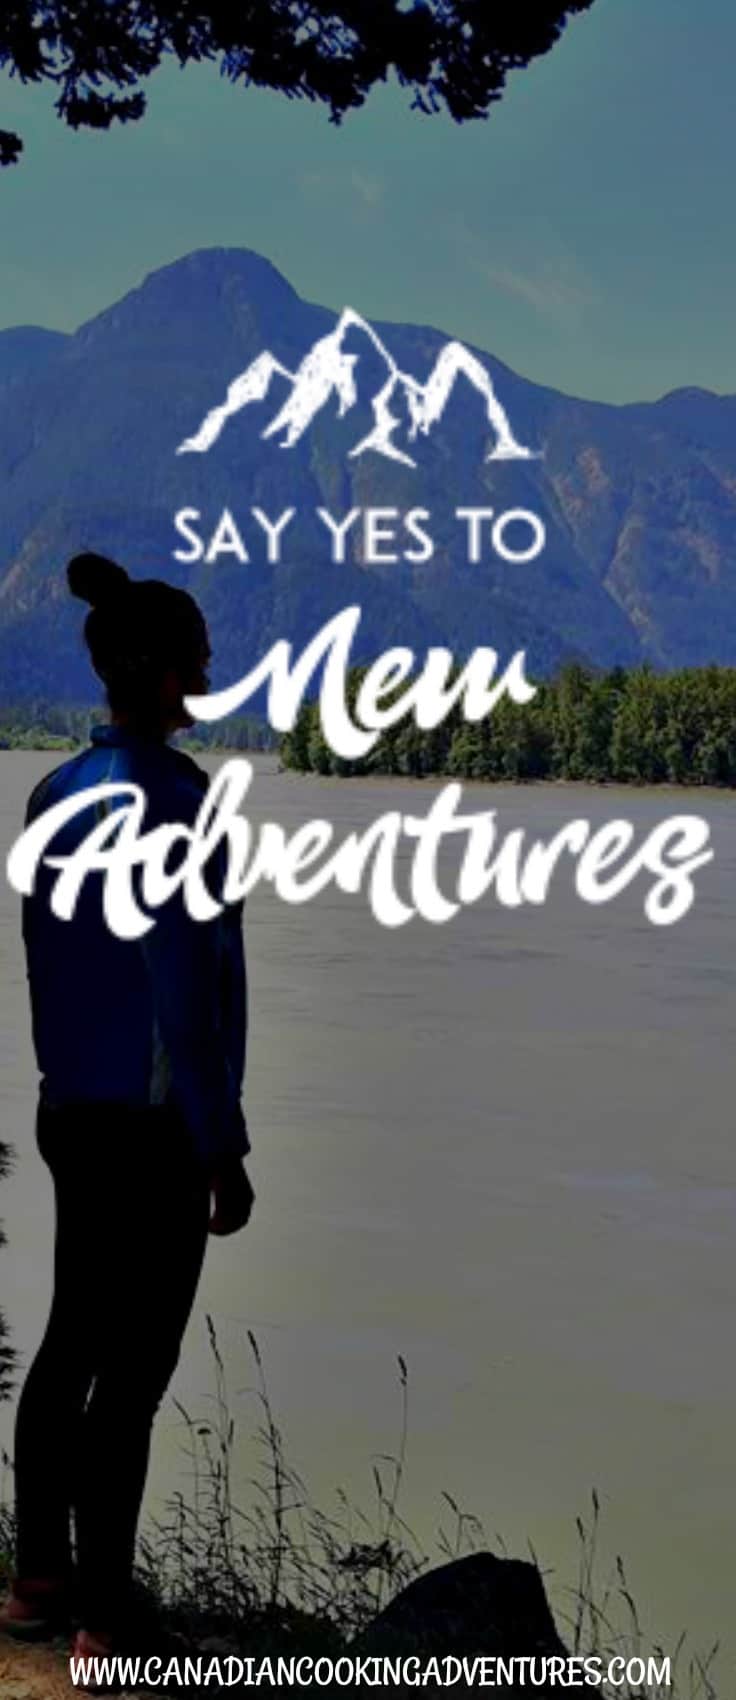 SAY YES TO NEW ADVENTURES